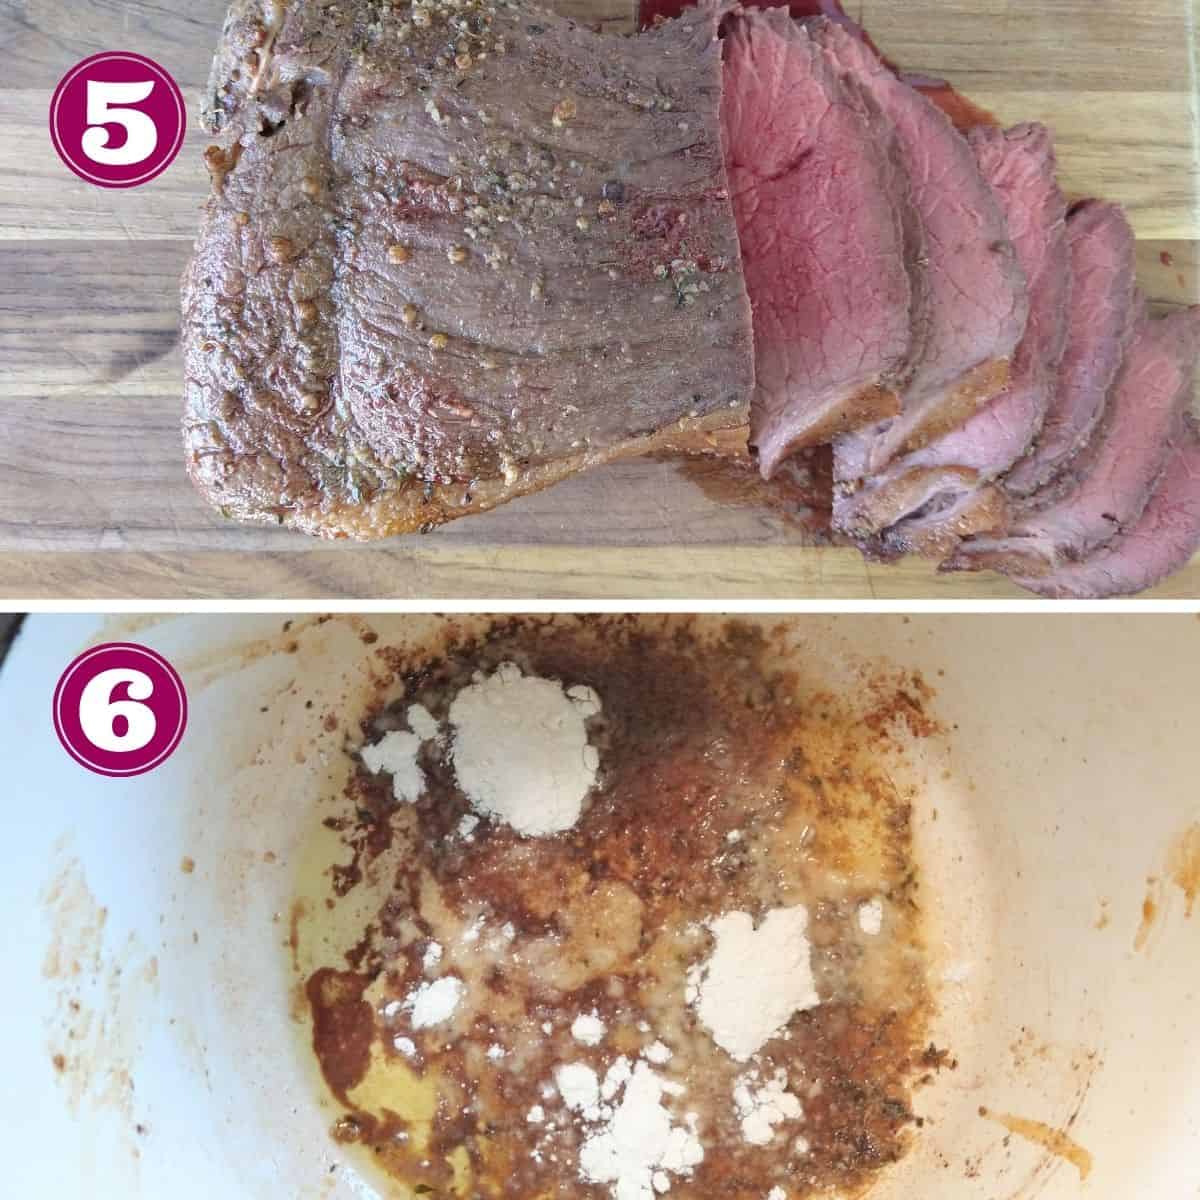 Step 5 shows the roast being sliced on a wooden cutting board.
Step 6 shows the beef drippings in the bottom of the Dutch oven with flour added to it.